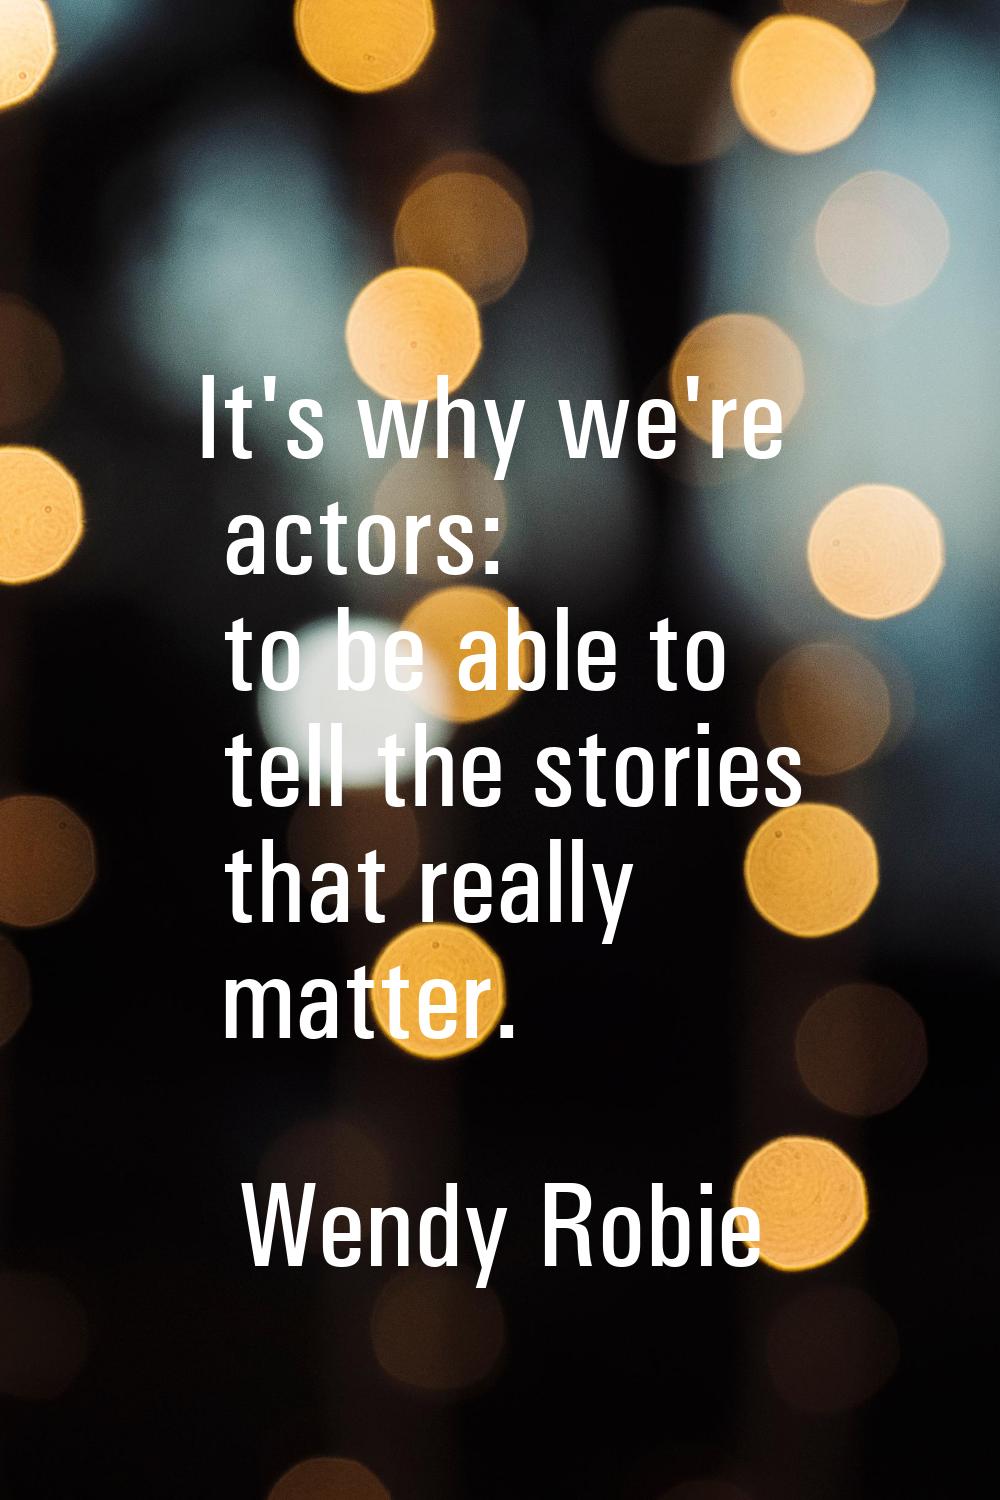 It's why we're actors: to be able to tell the stories that really matter.